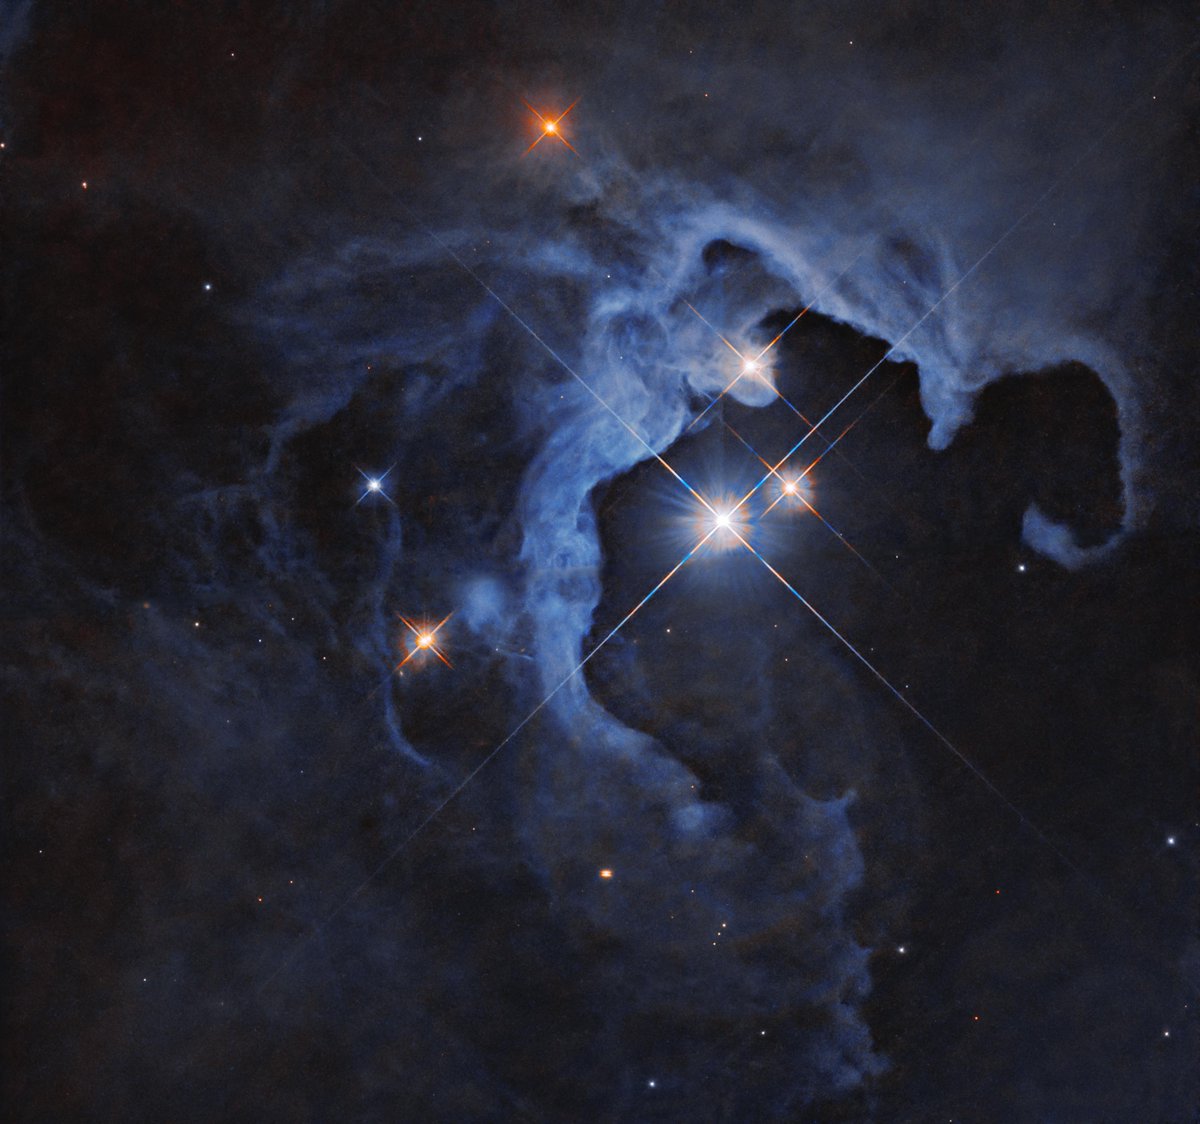 A trio of stunning stars blaze from the hollowed-out cavity of a reflection nebula in this dazzling new image from @NASAHubble.

Explore more about this triple star system, located approximately 550 light-years away in the constellation Taurus: go.nasa.gov/3UA5xi8